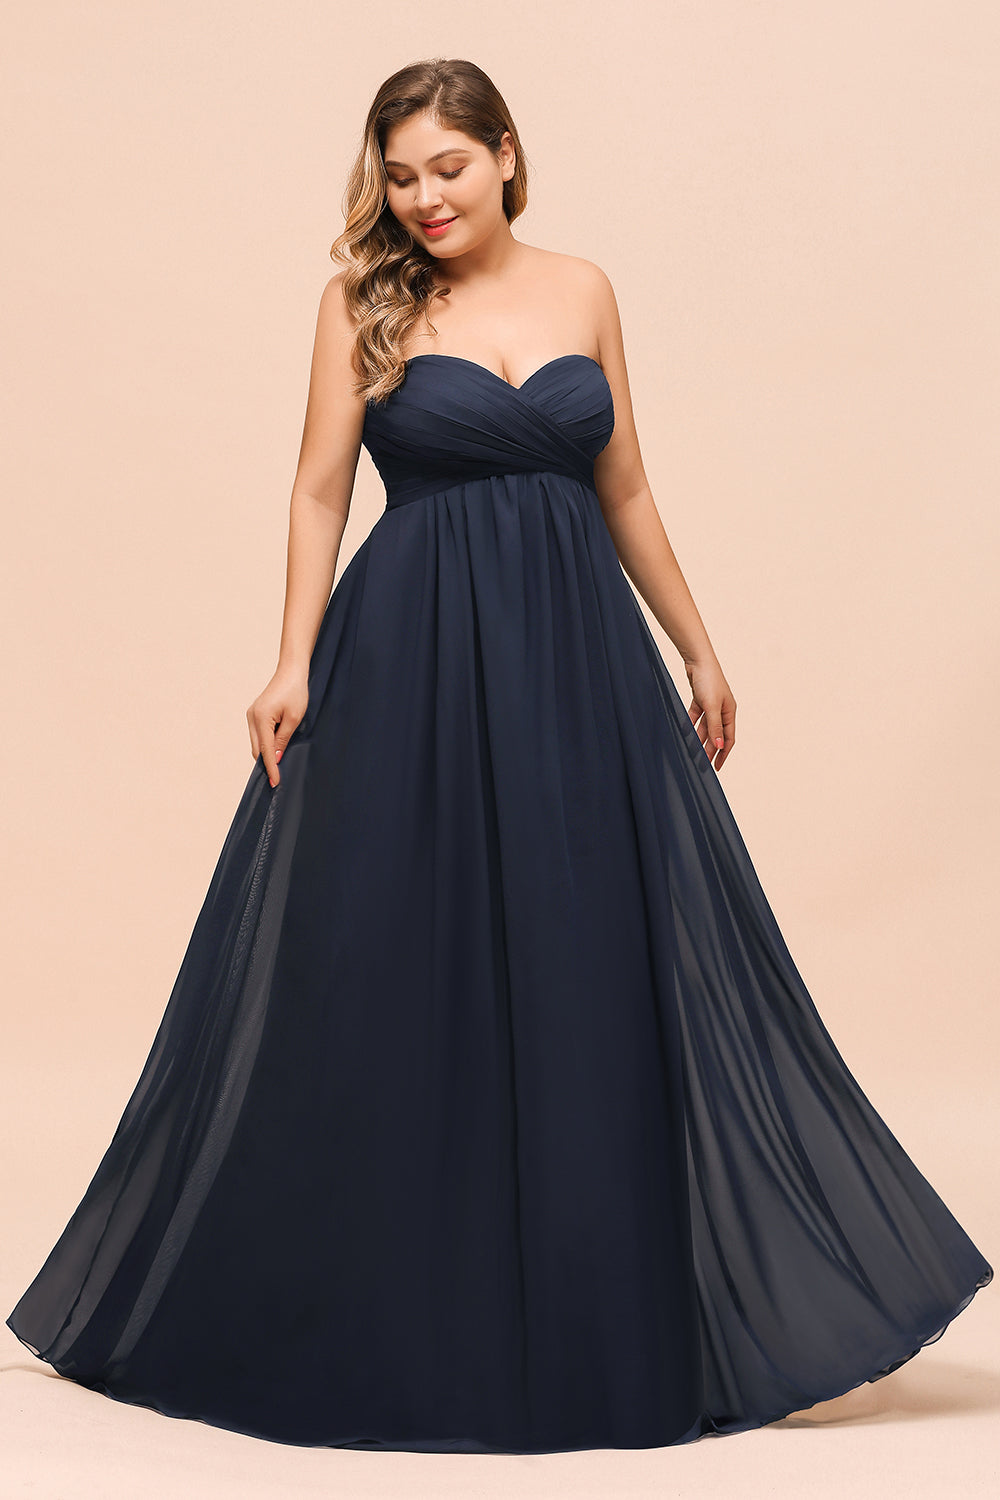 Affordable Strapless Sweetheart Long Bridesmaid Dress with Ruffle-27dress